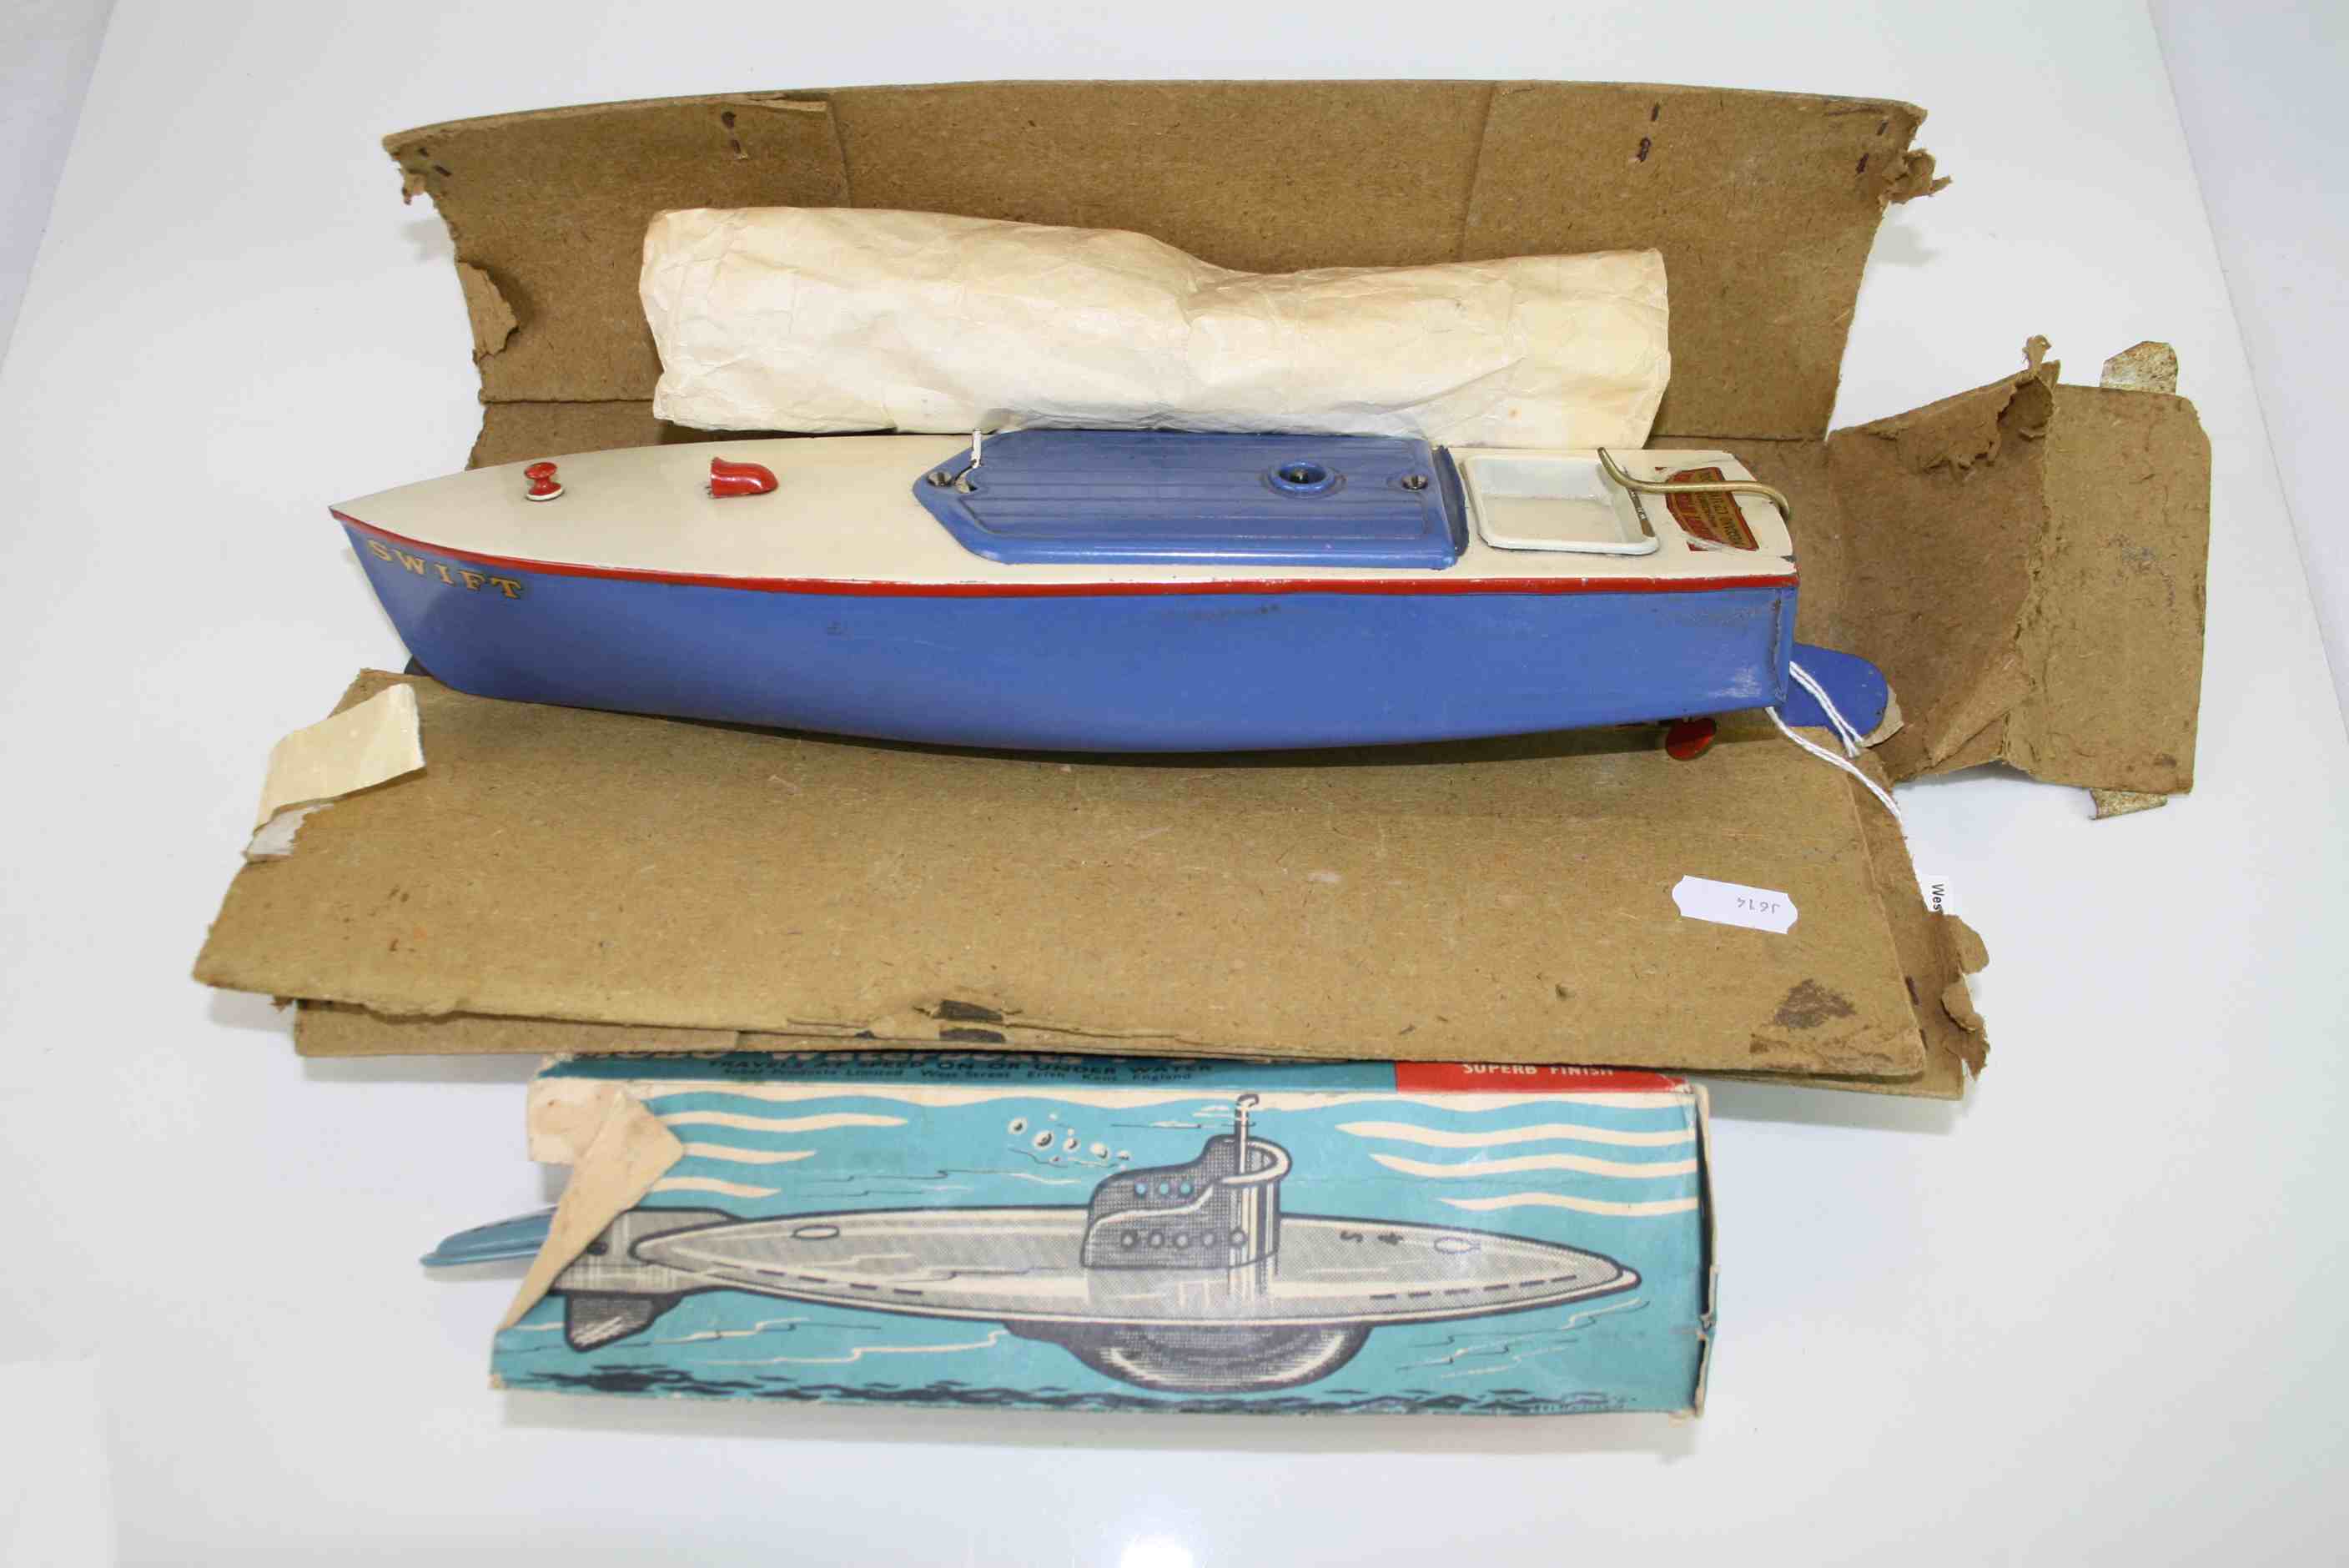 Boxed Hornby Speedboat 'Swift' and a boxed Mobo Snort Submarine mk II S Class with accessories (2)